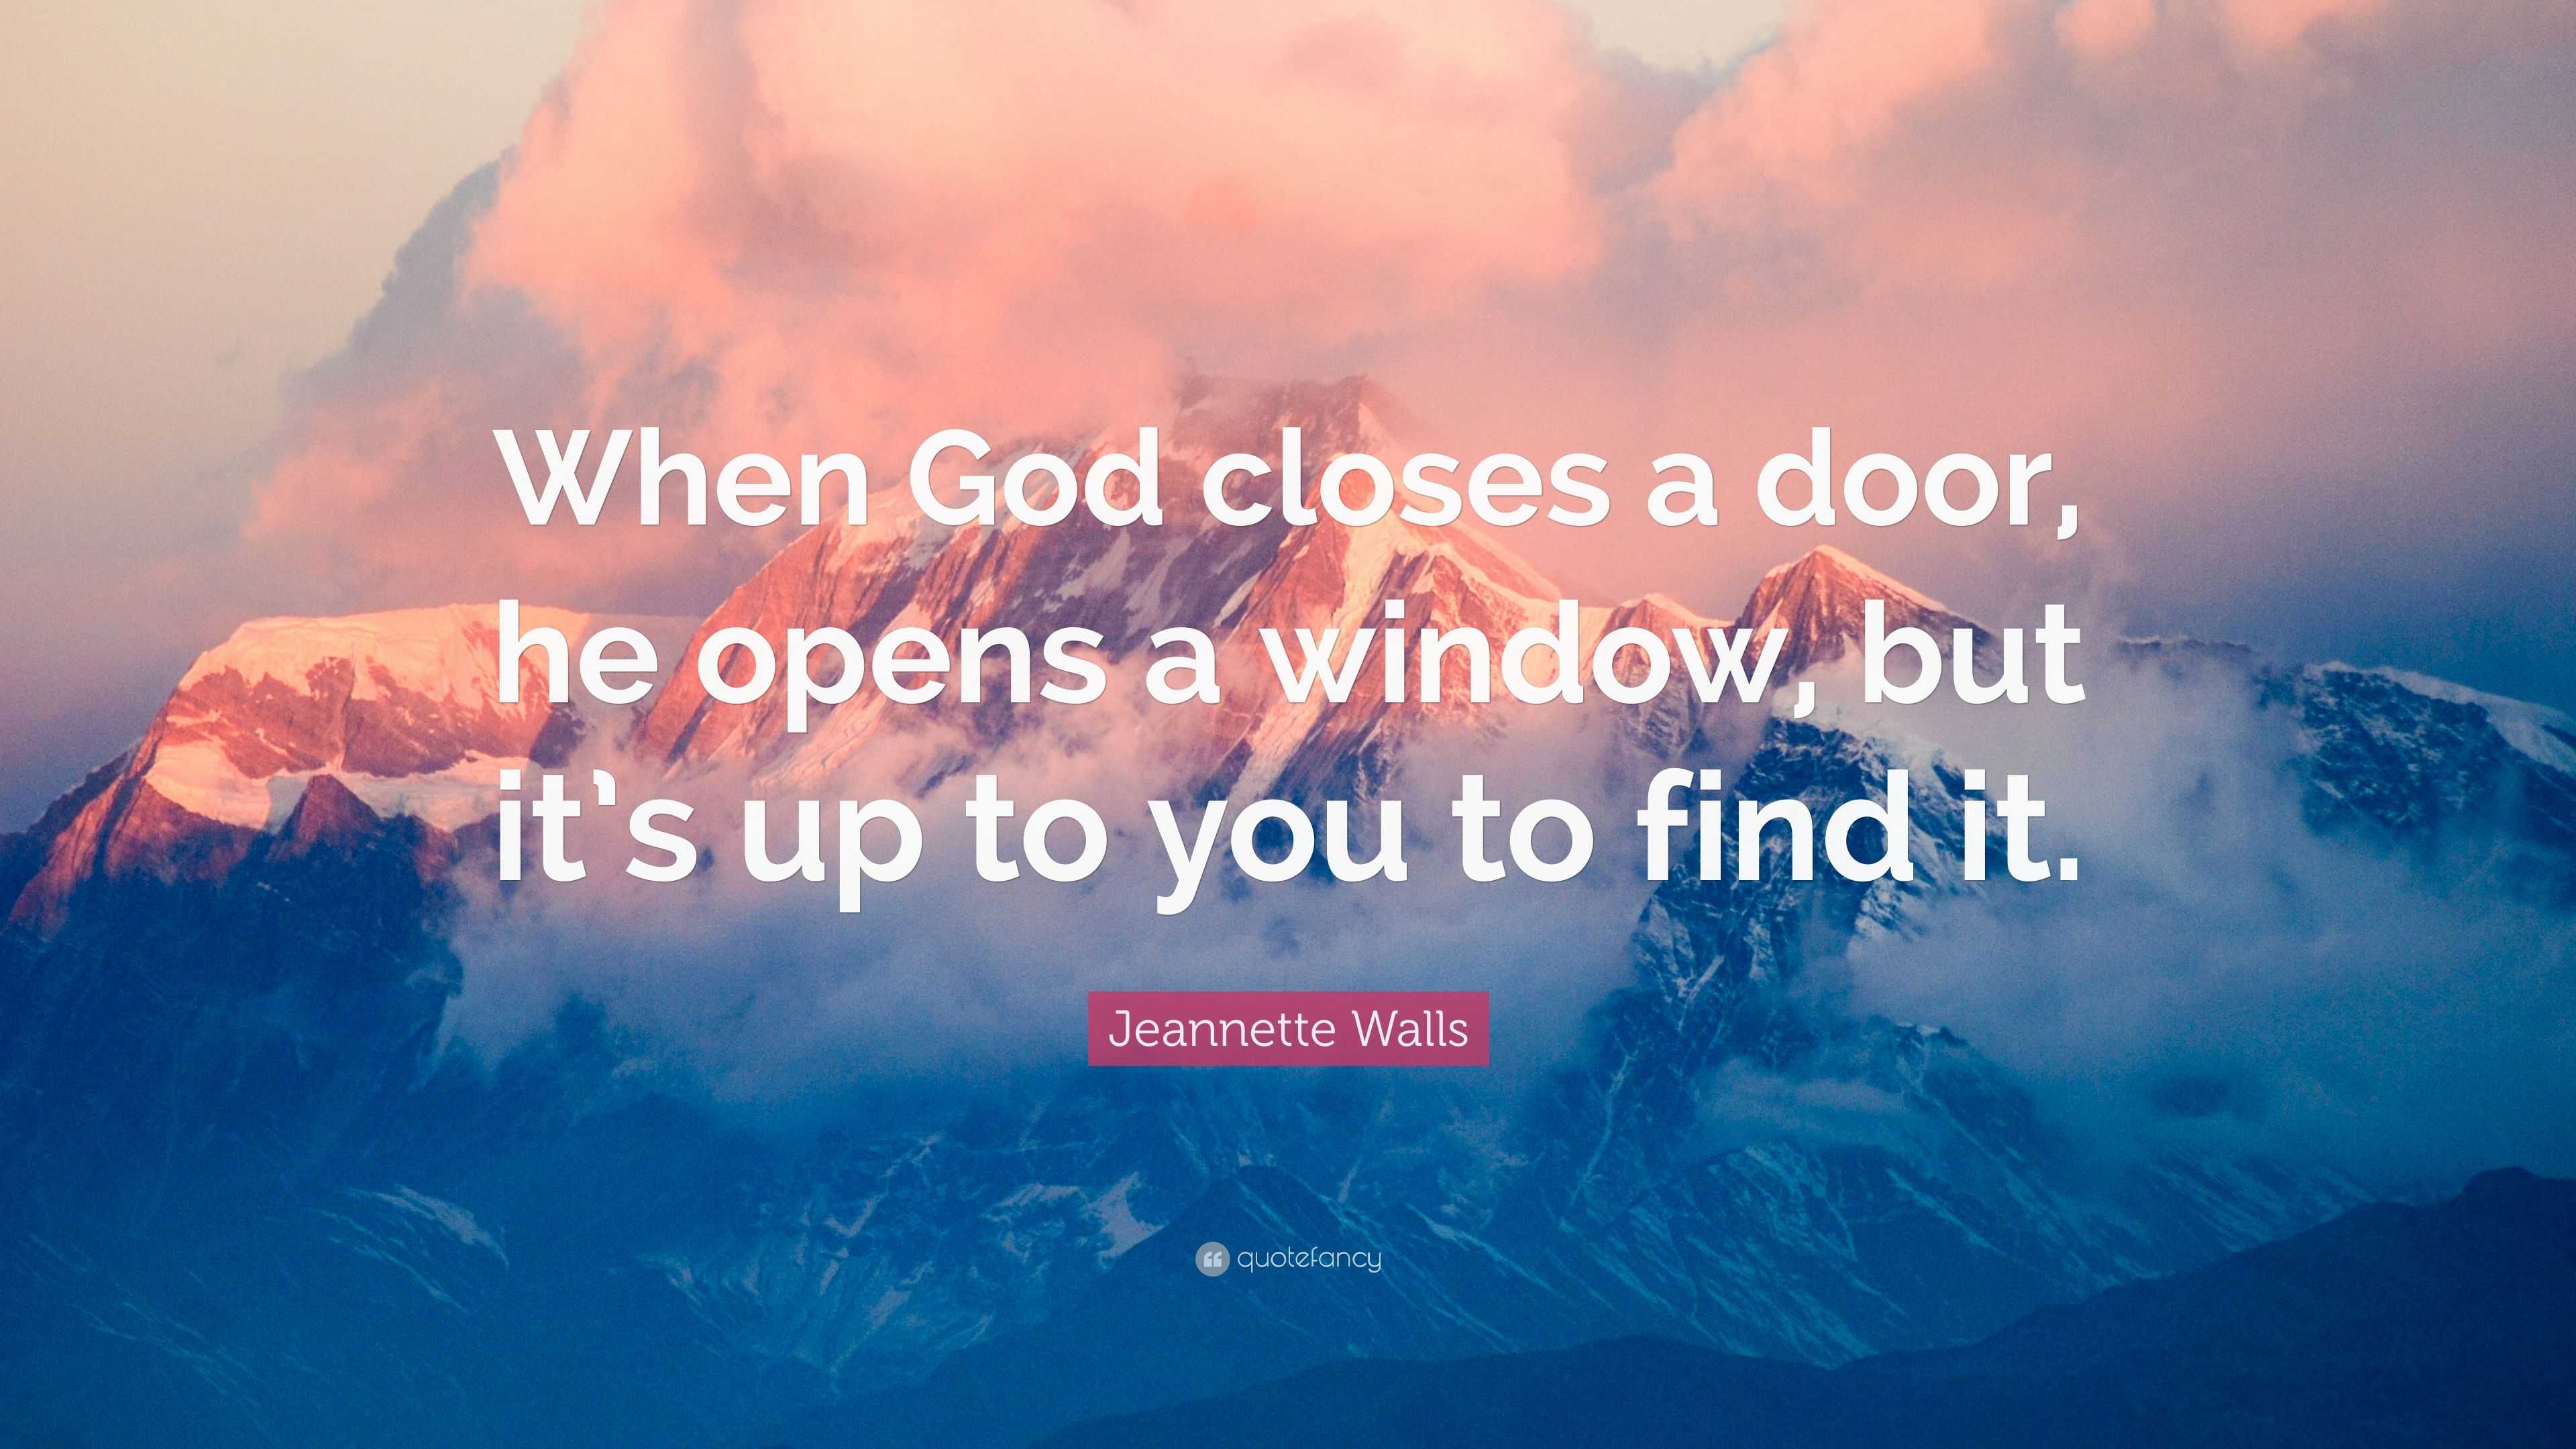 Jeannette Walls Quote: “When God closes a door, he opens a window, but ...